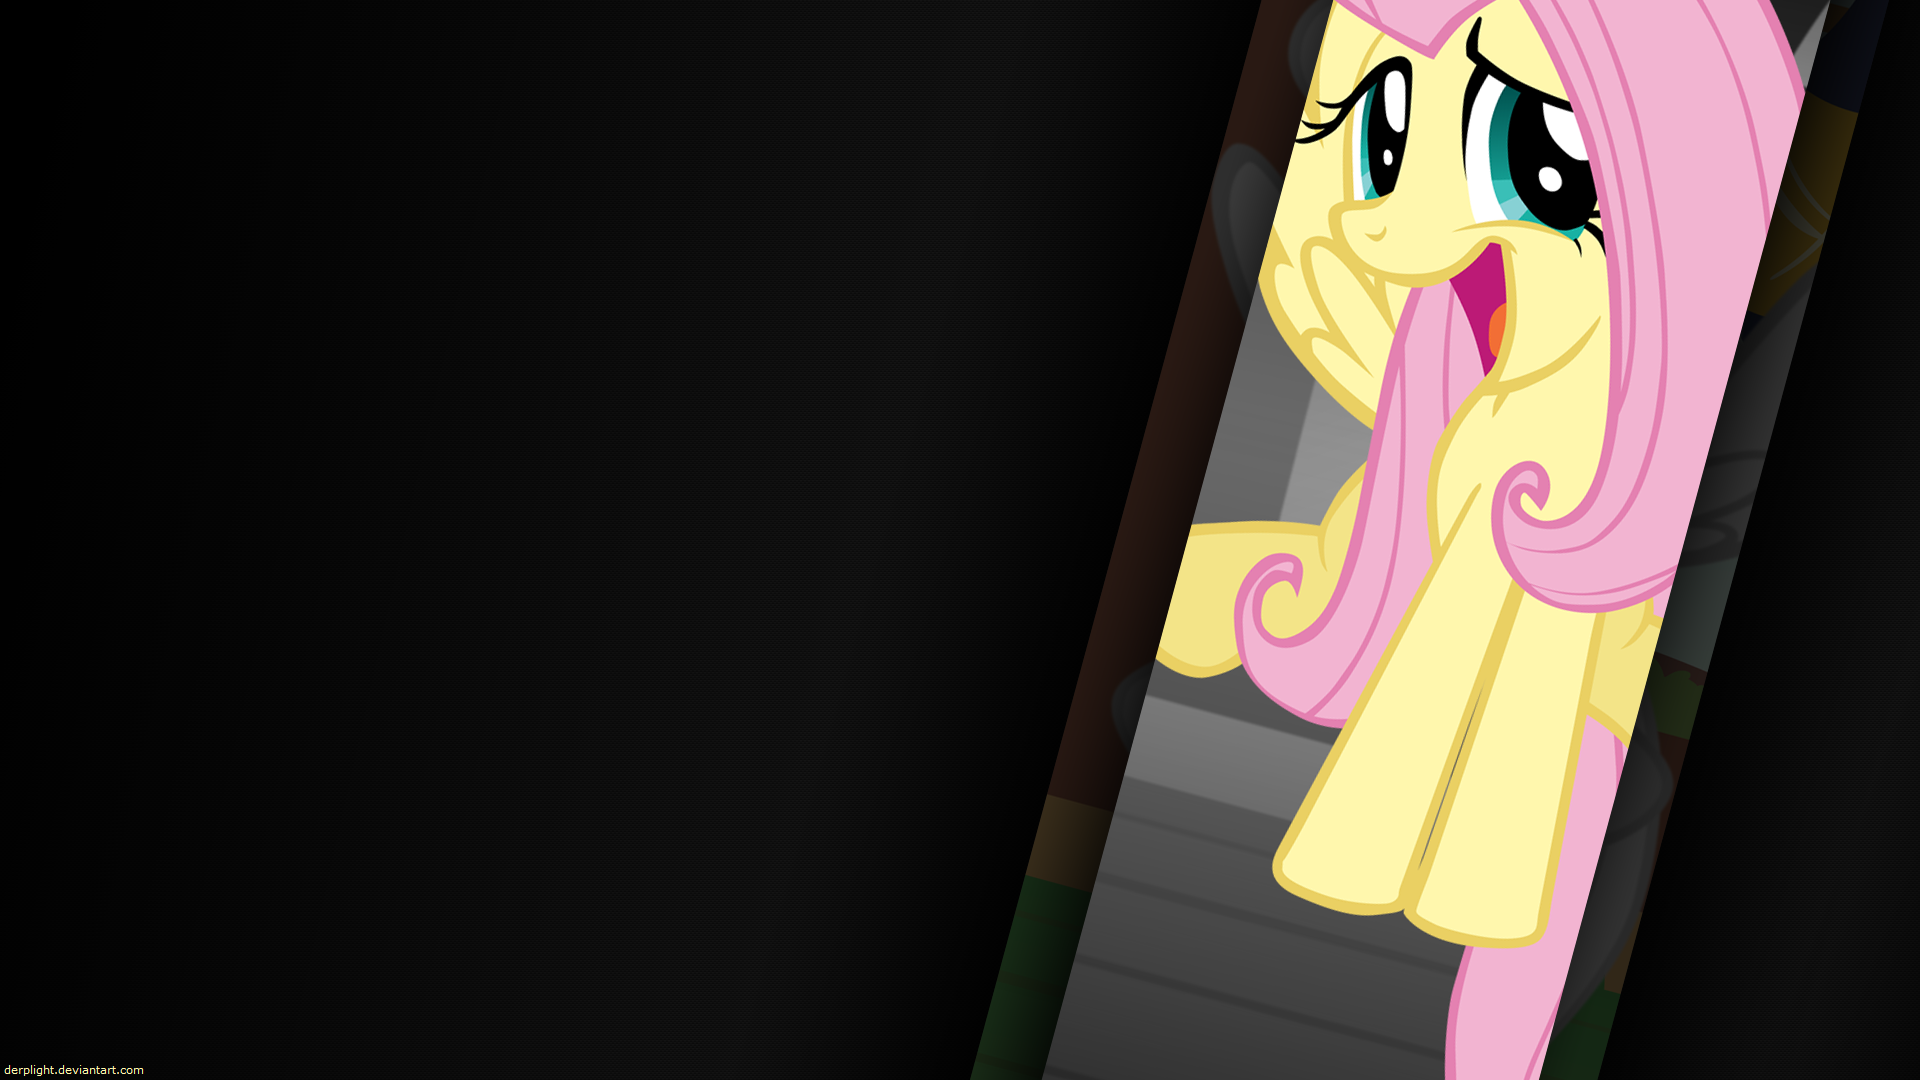 Untitled Fluttershy Wallpaper by anitech, DerpLight and MusicalWolfe